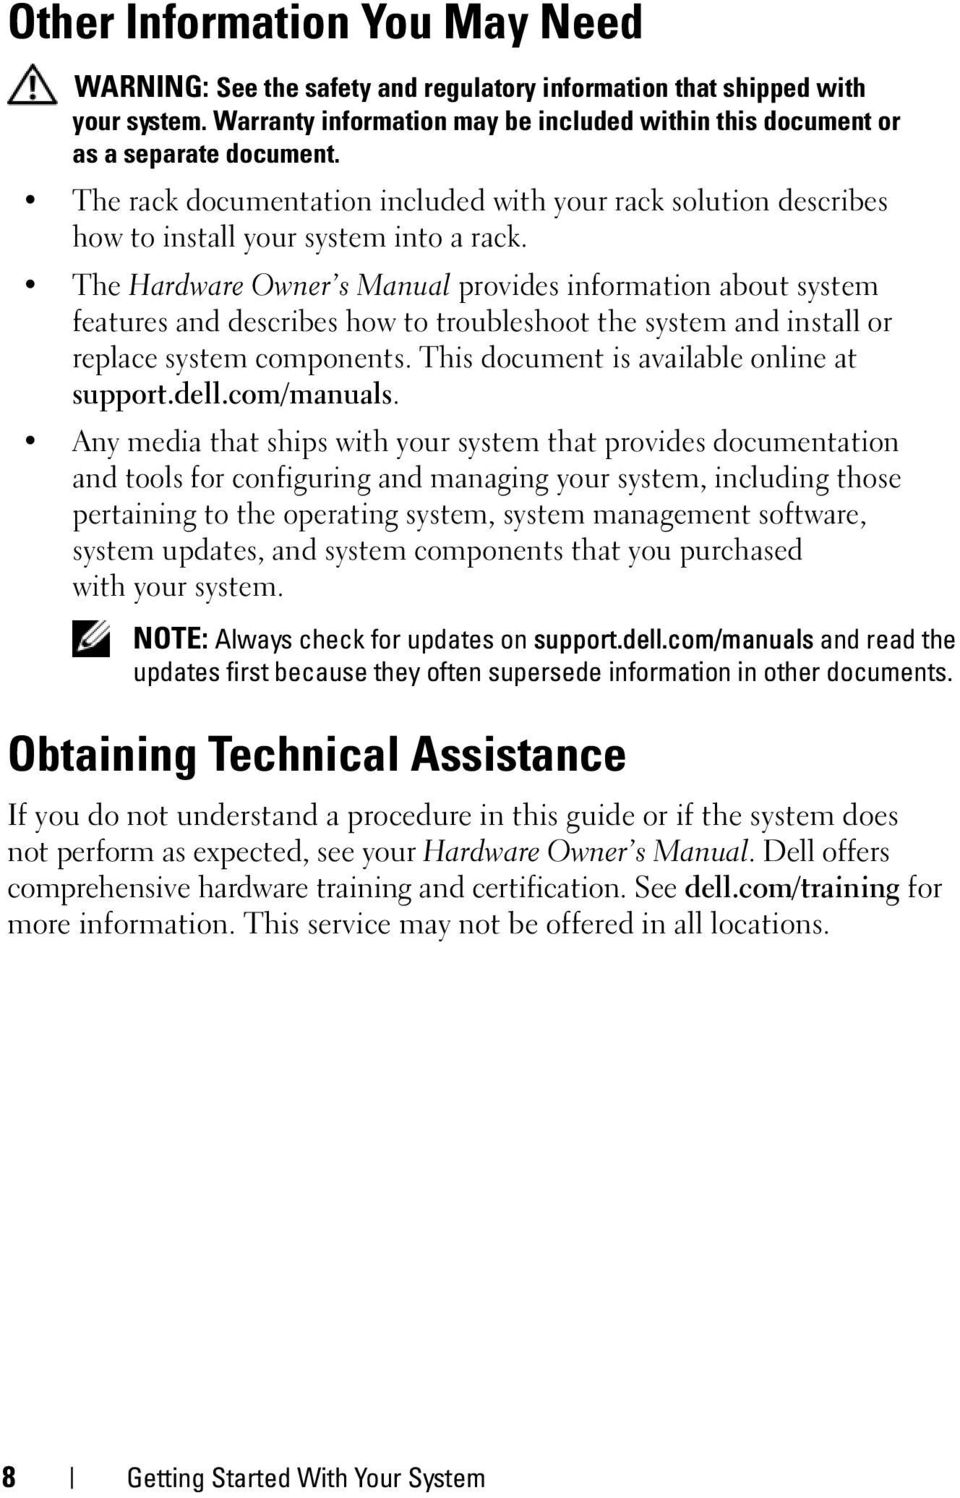 The Hardware Owner s Manual provides information about system features and describes how to troubleshoot the system and install or replace system components.